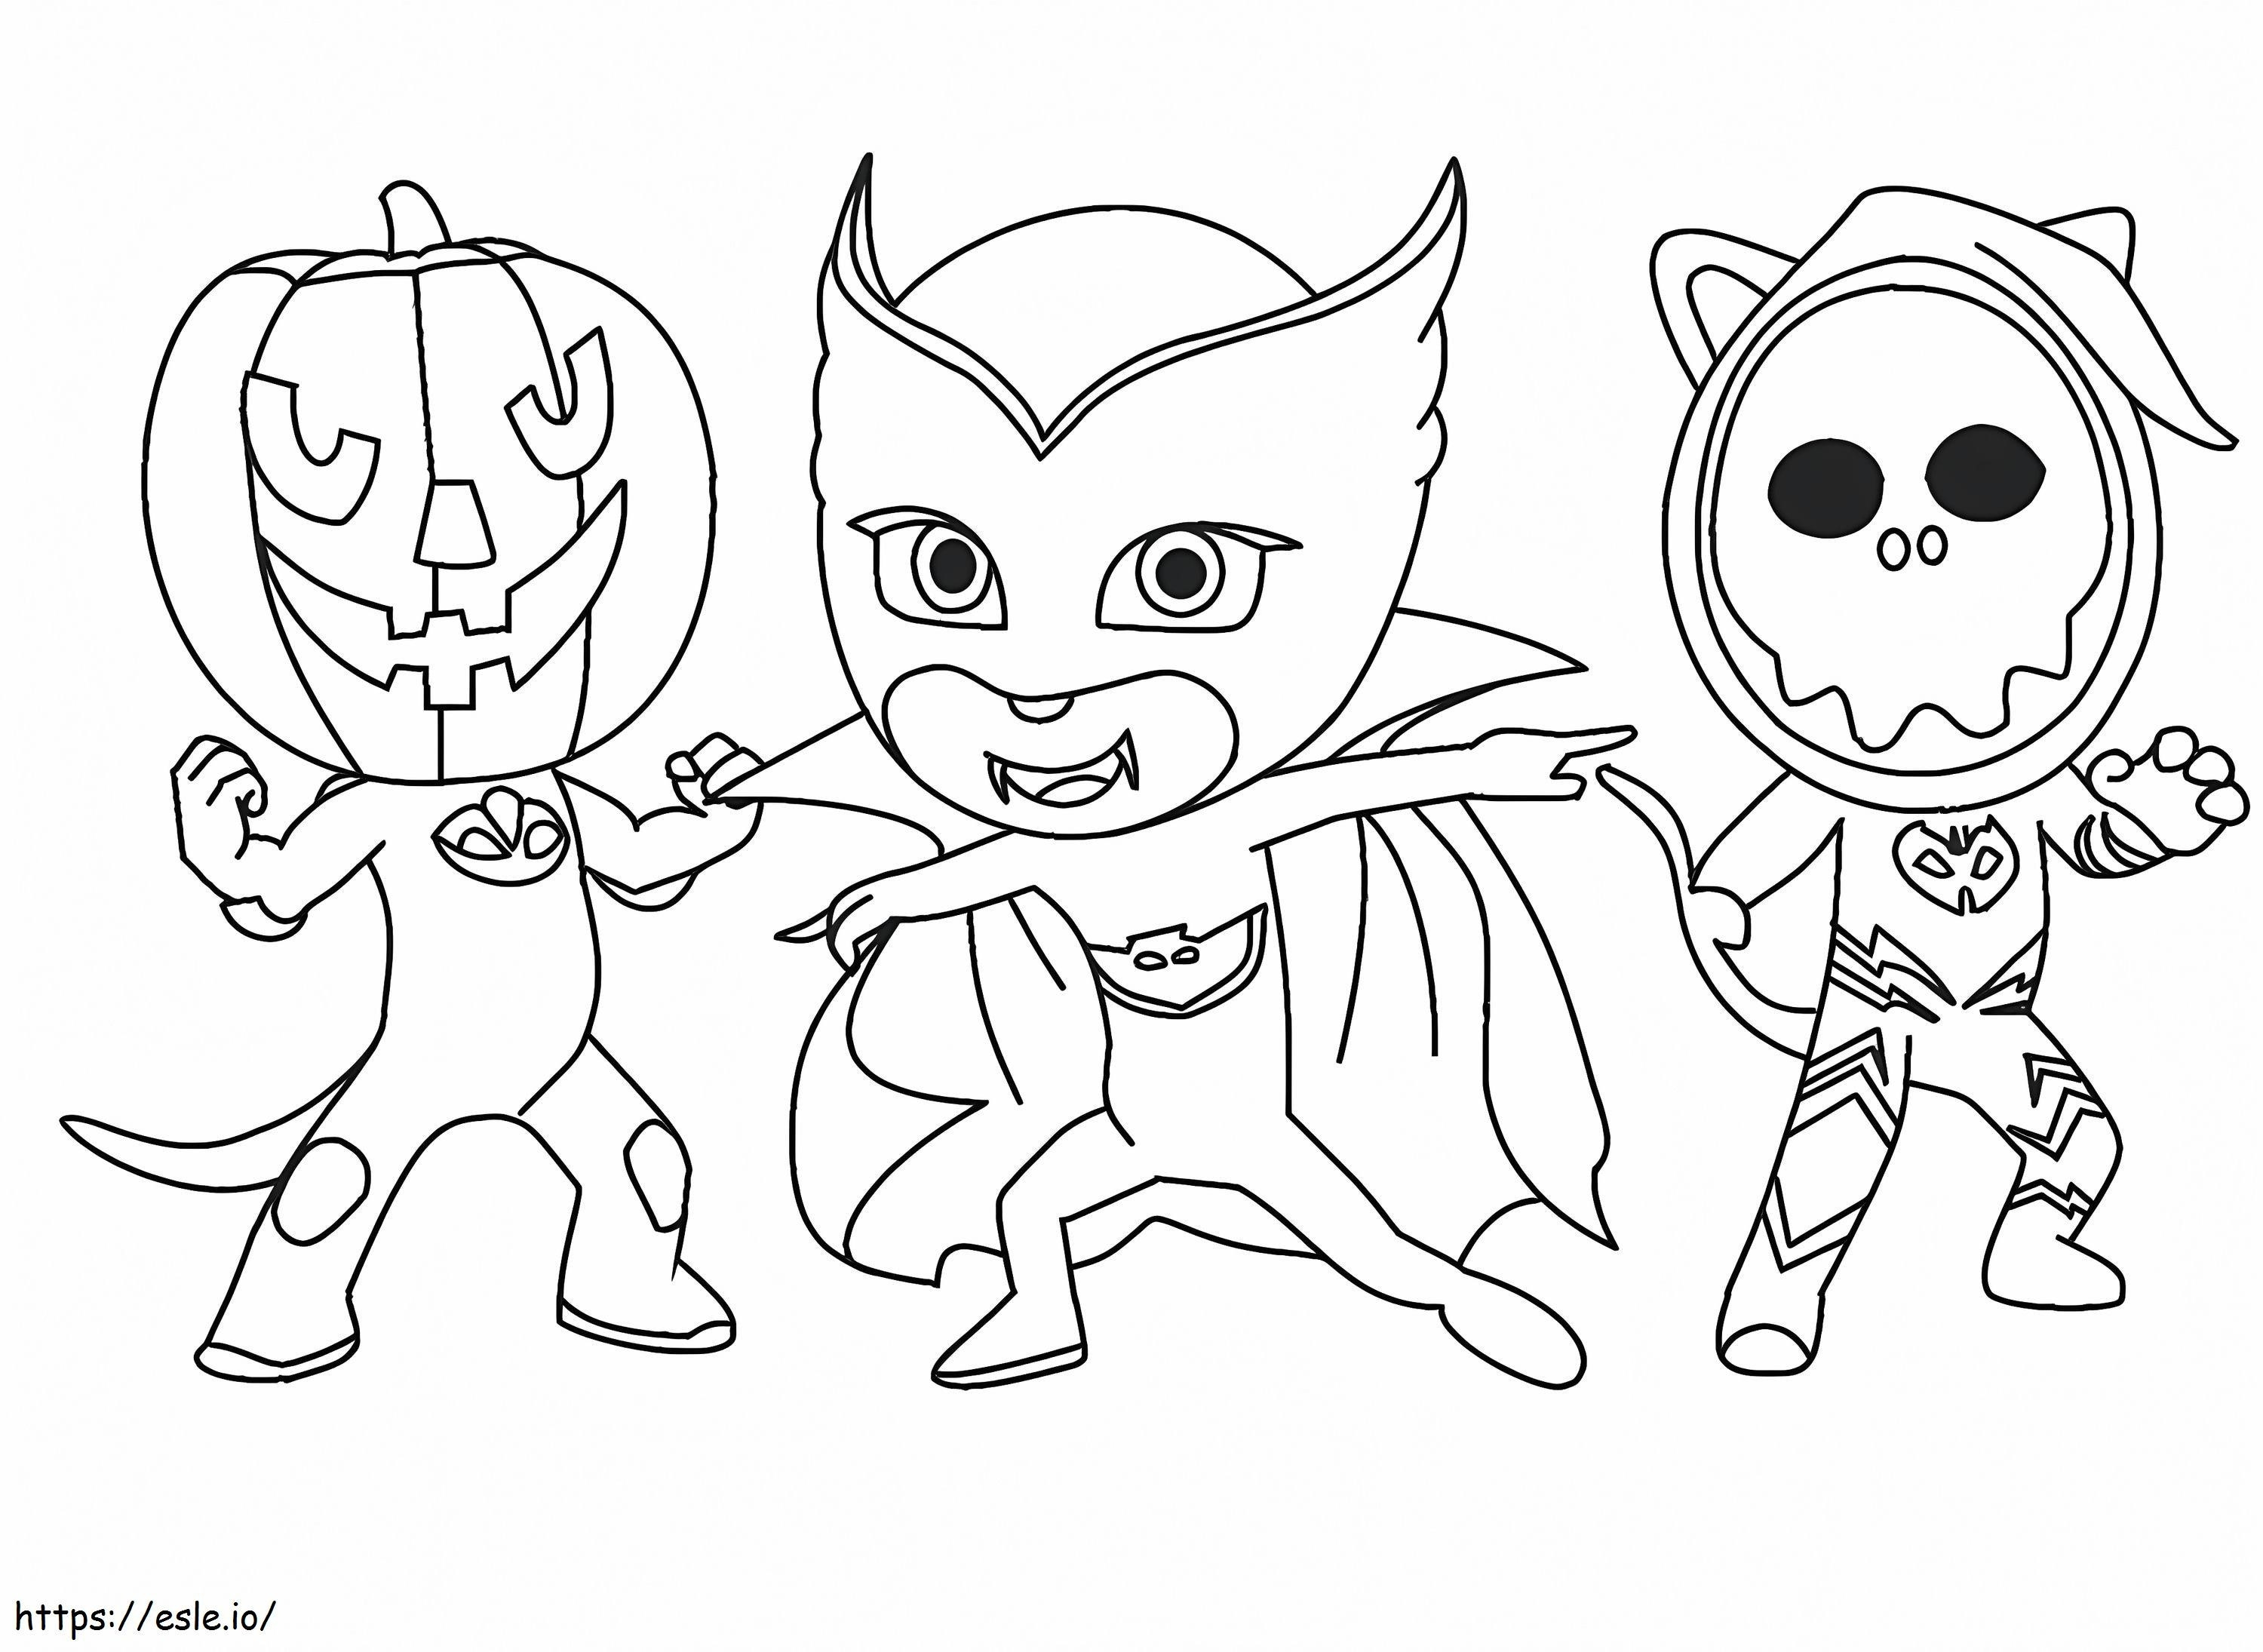 PJ Masks On Halloween coloring page